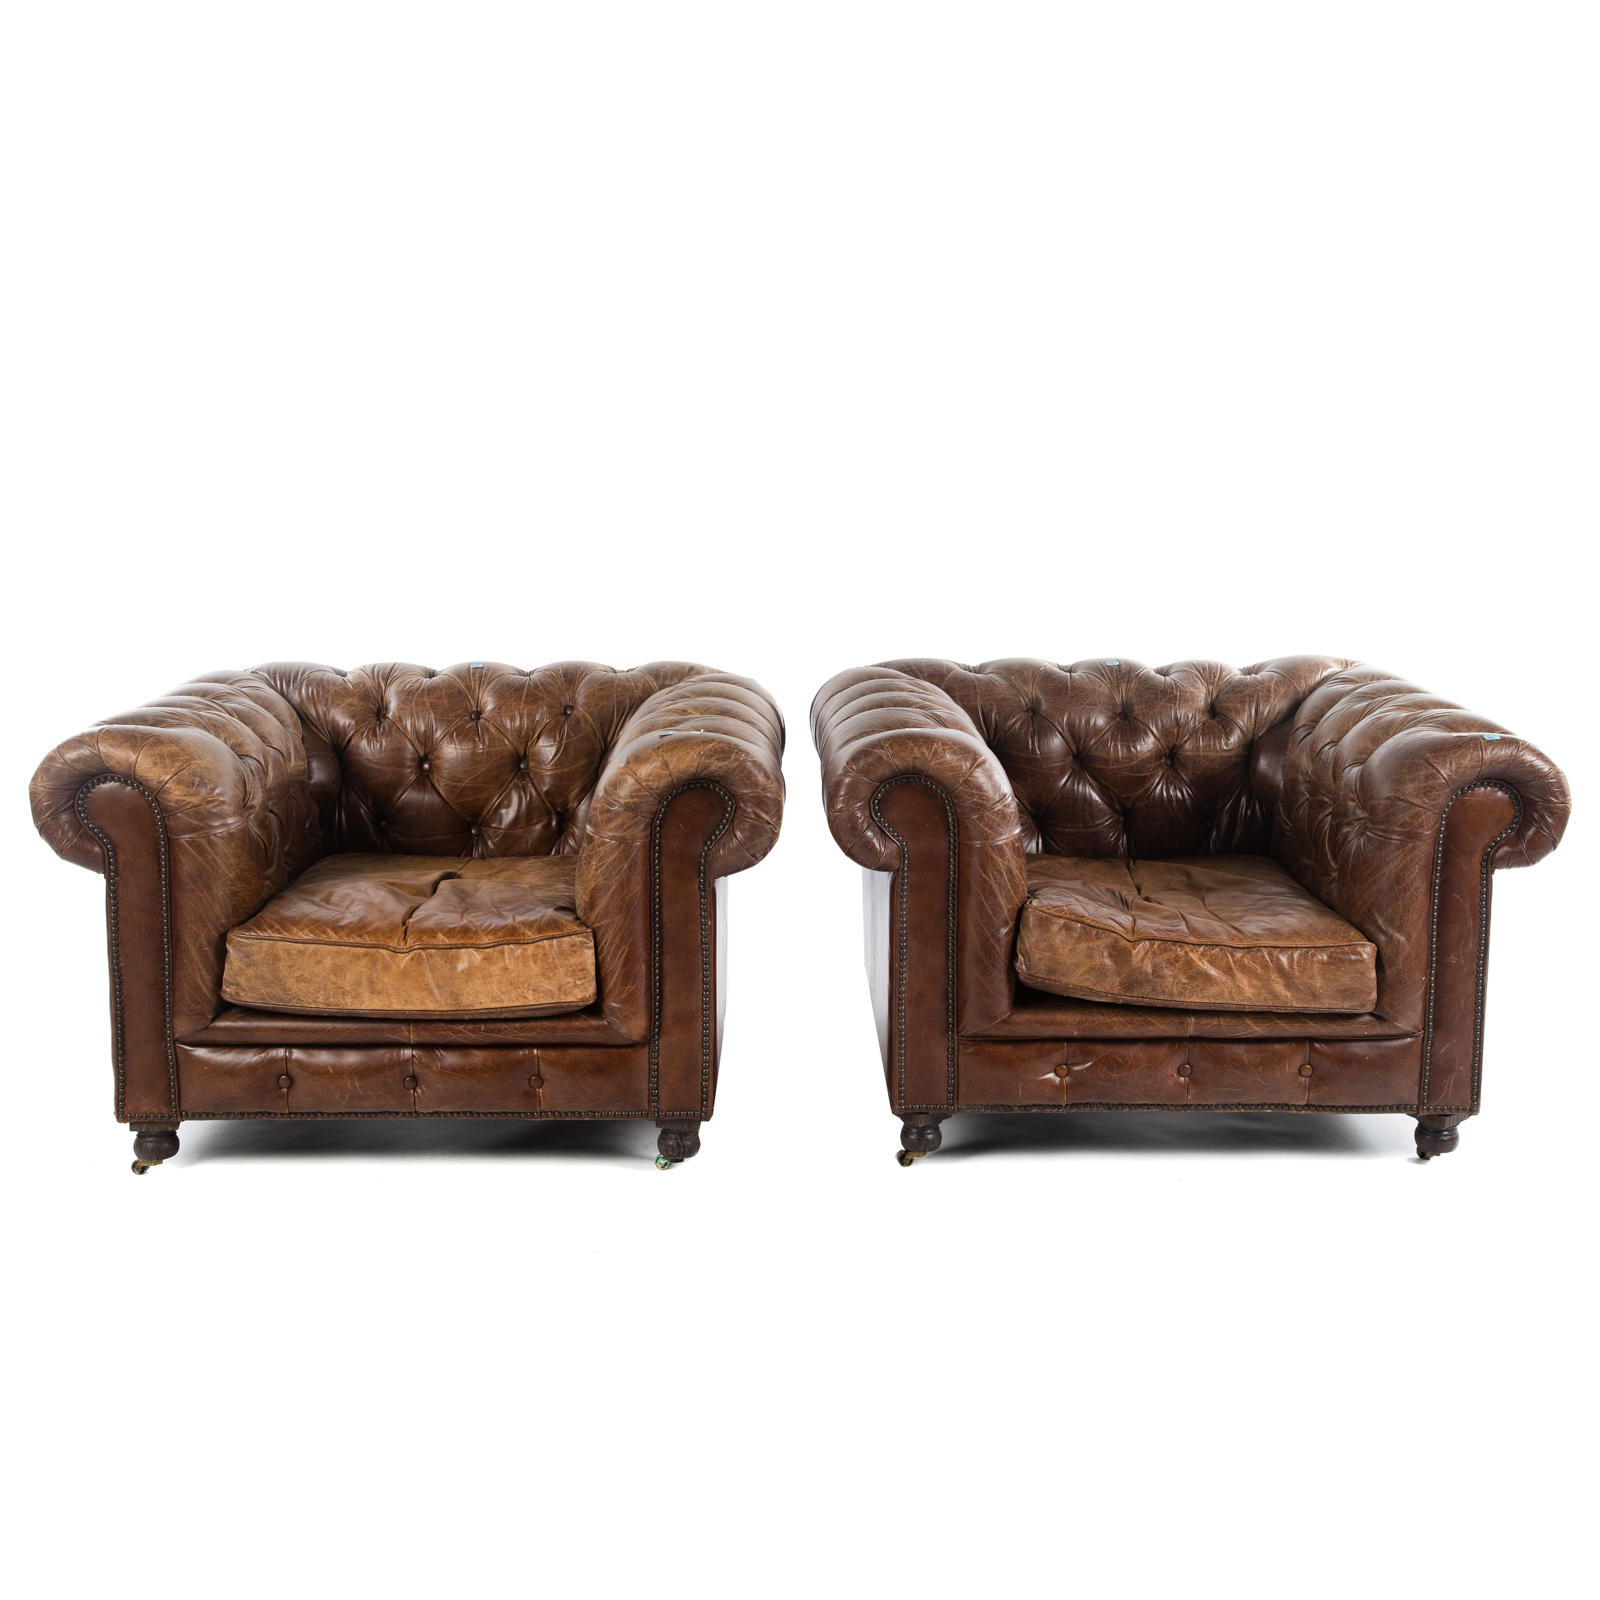 A PAIR OF RESTORATION HARDWARE 369427